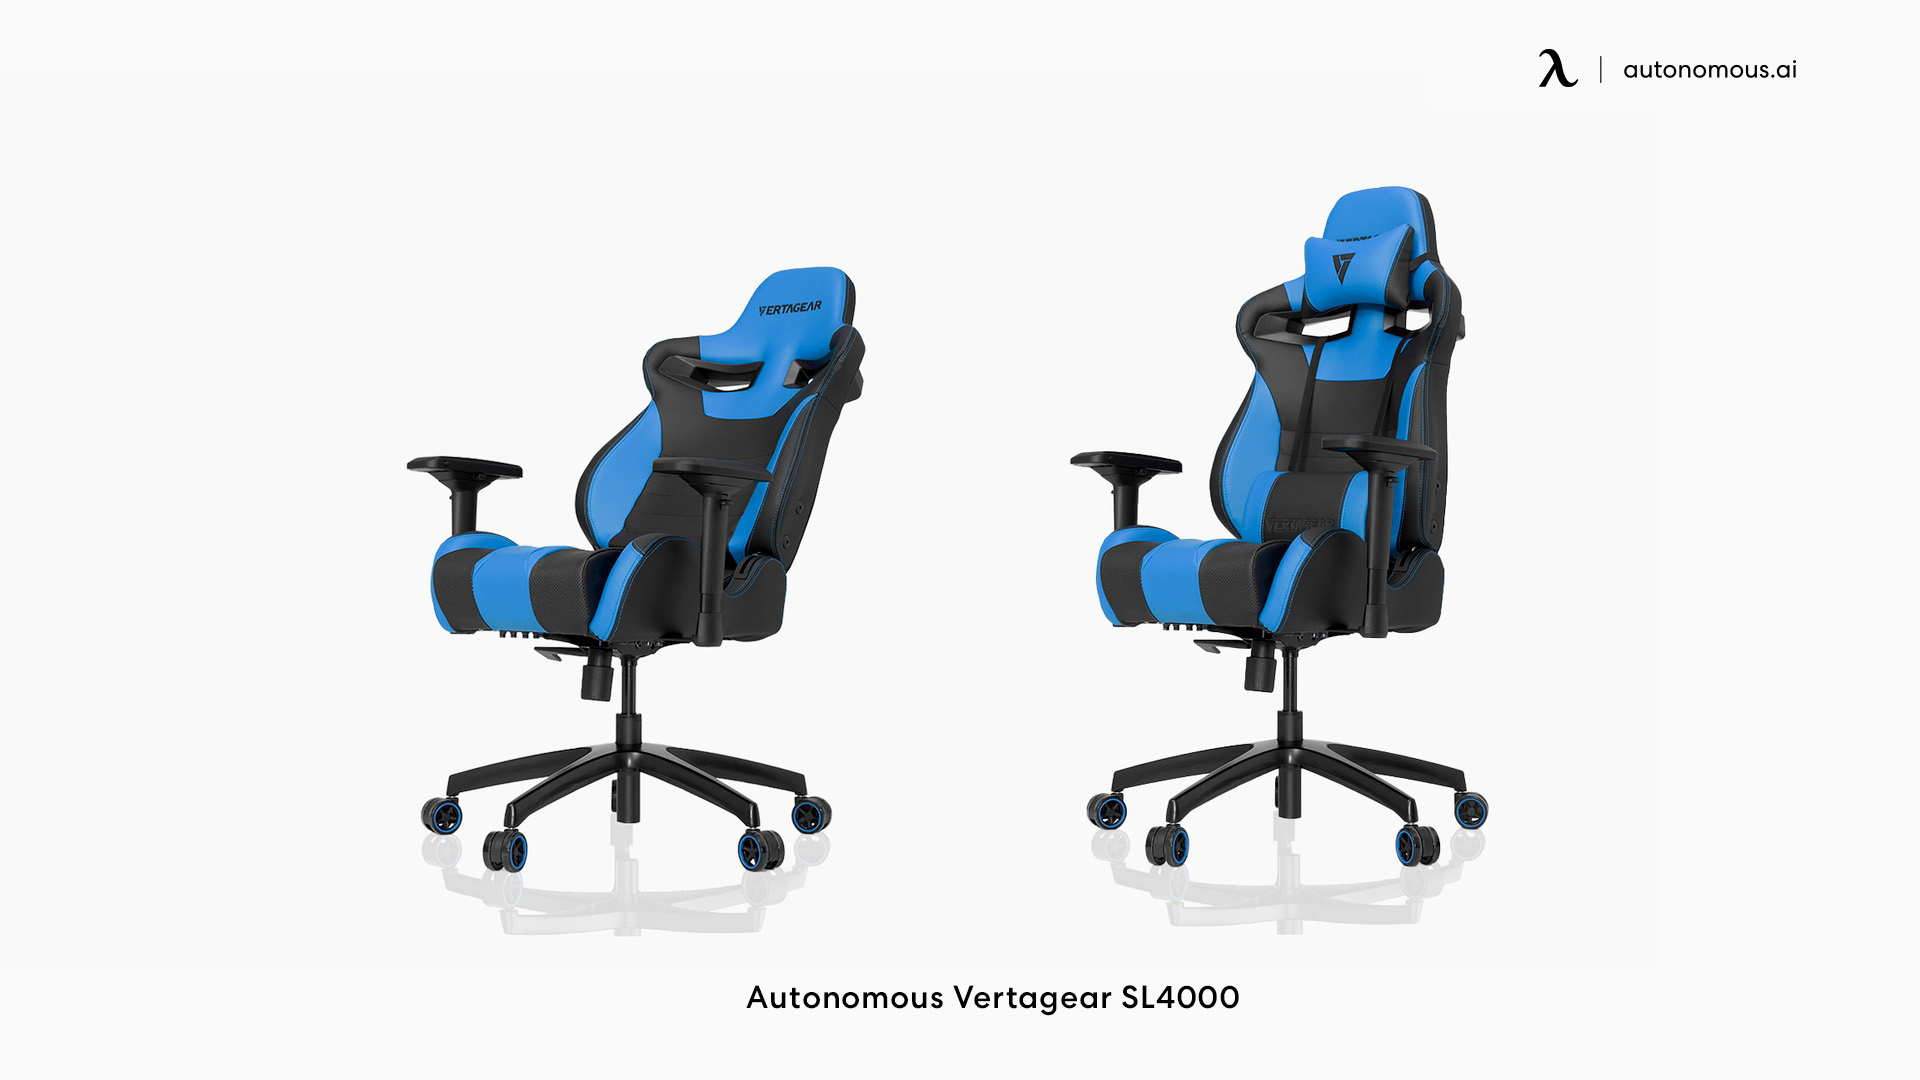 Vertagear's SL4000 extra wide gaming chair